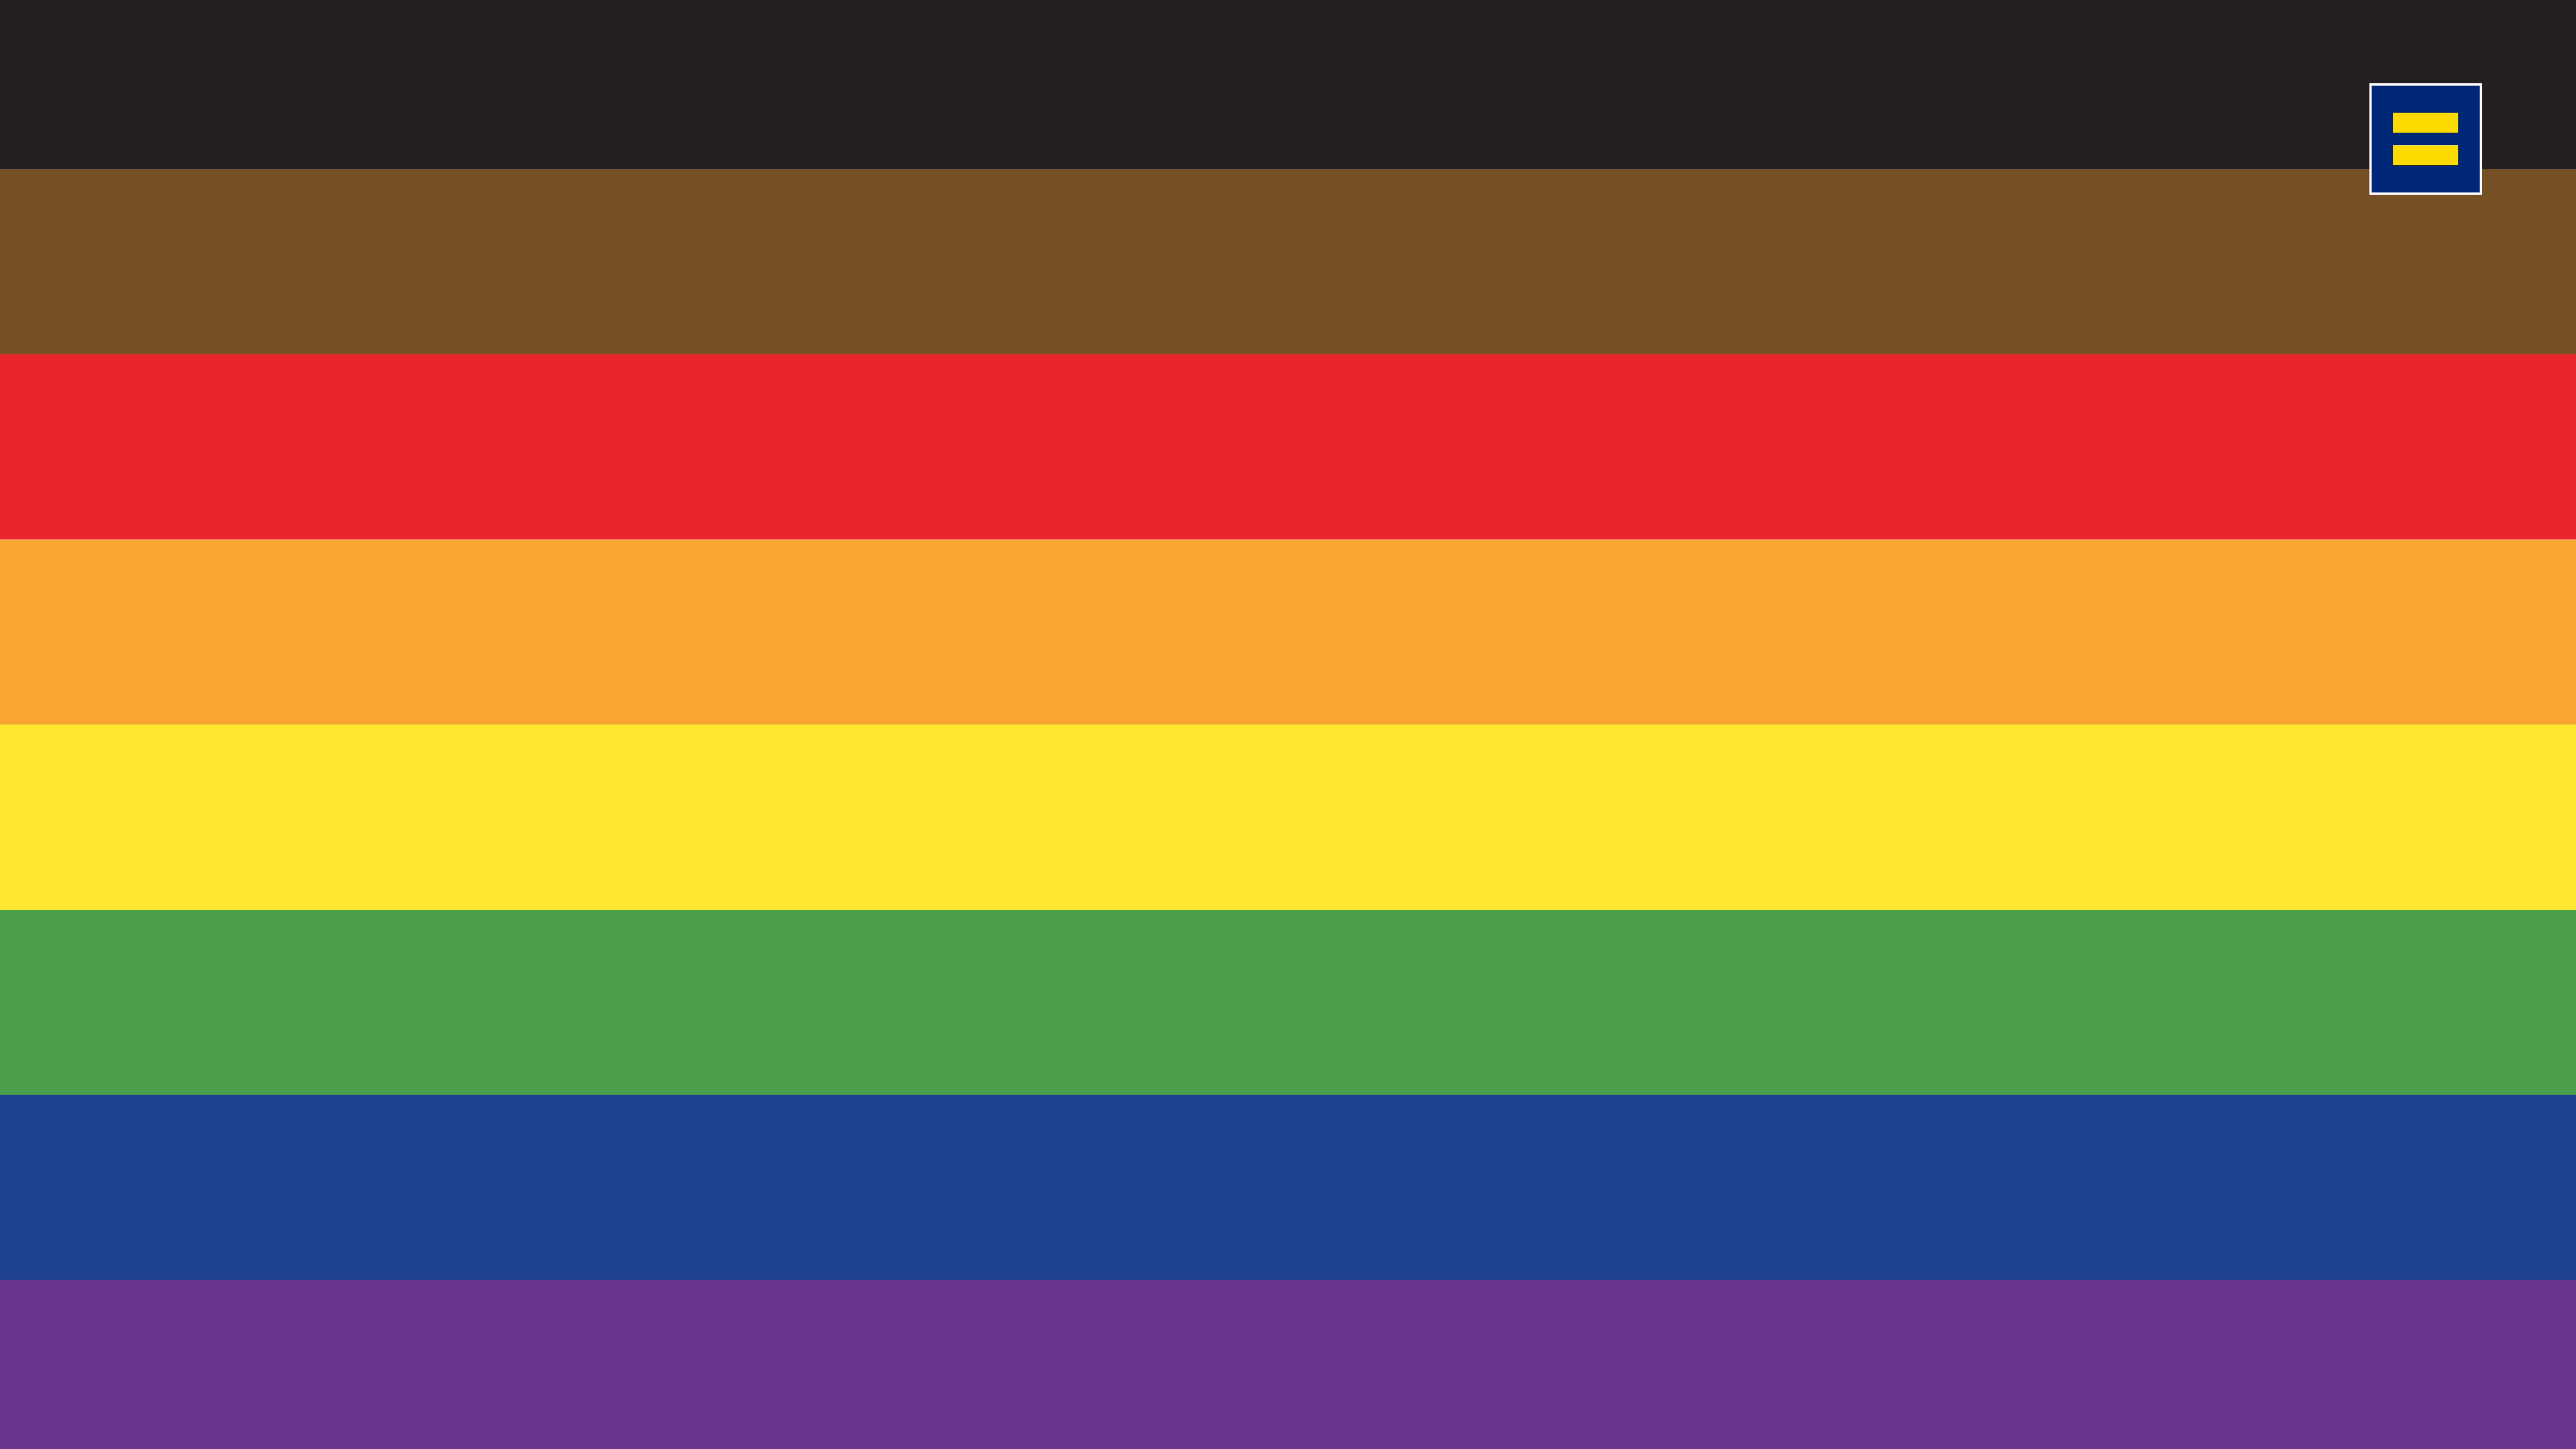 MCMP Flag - Show your pride and promote LGBTQ rights